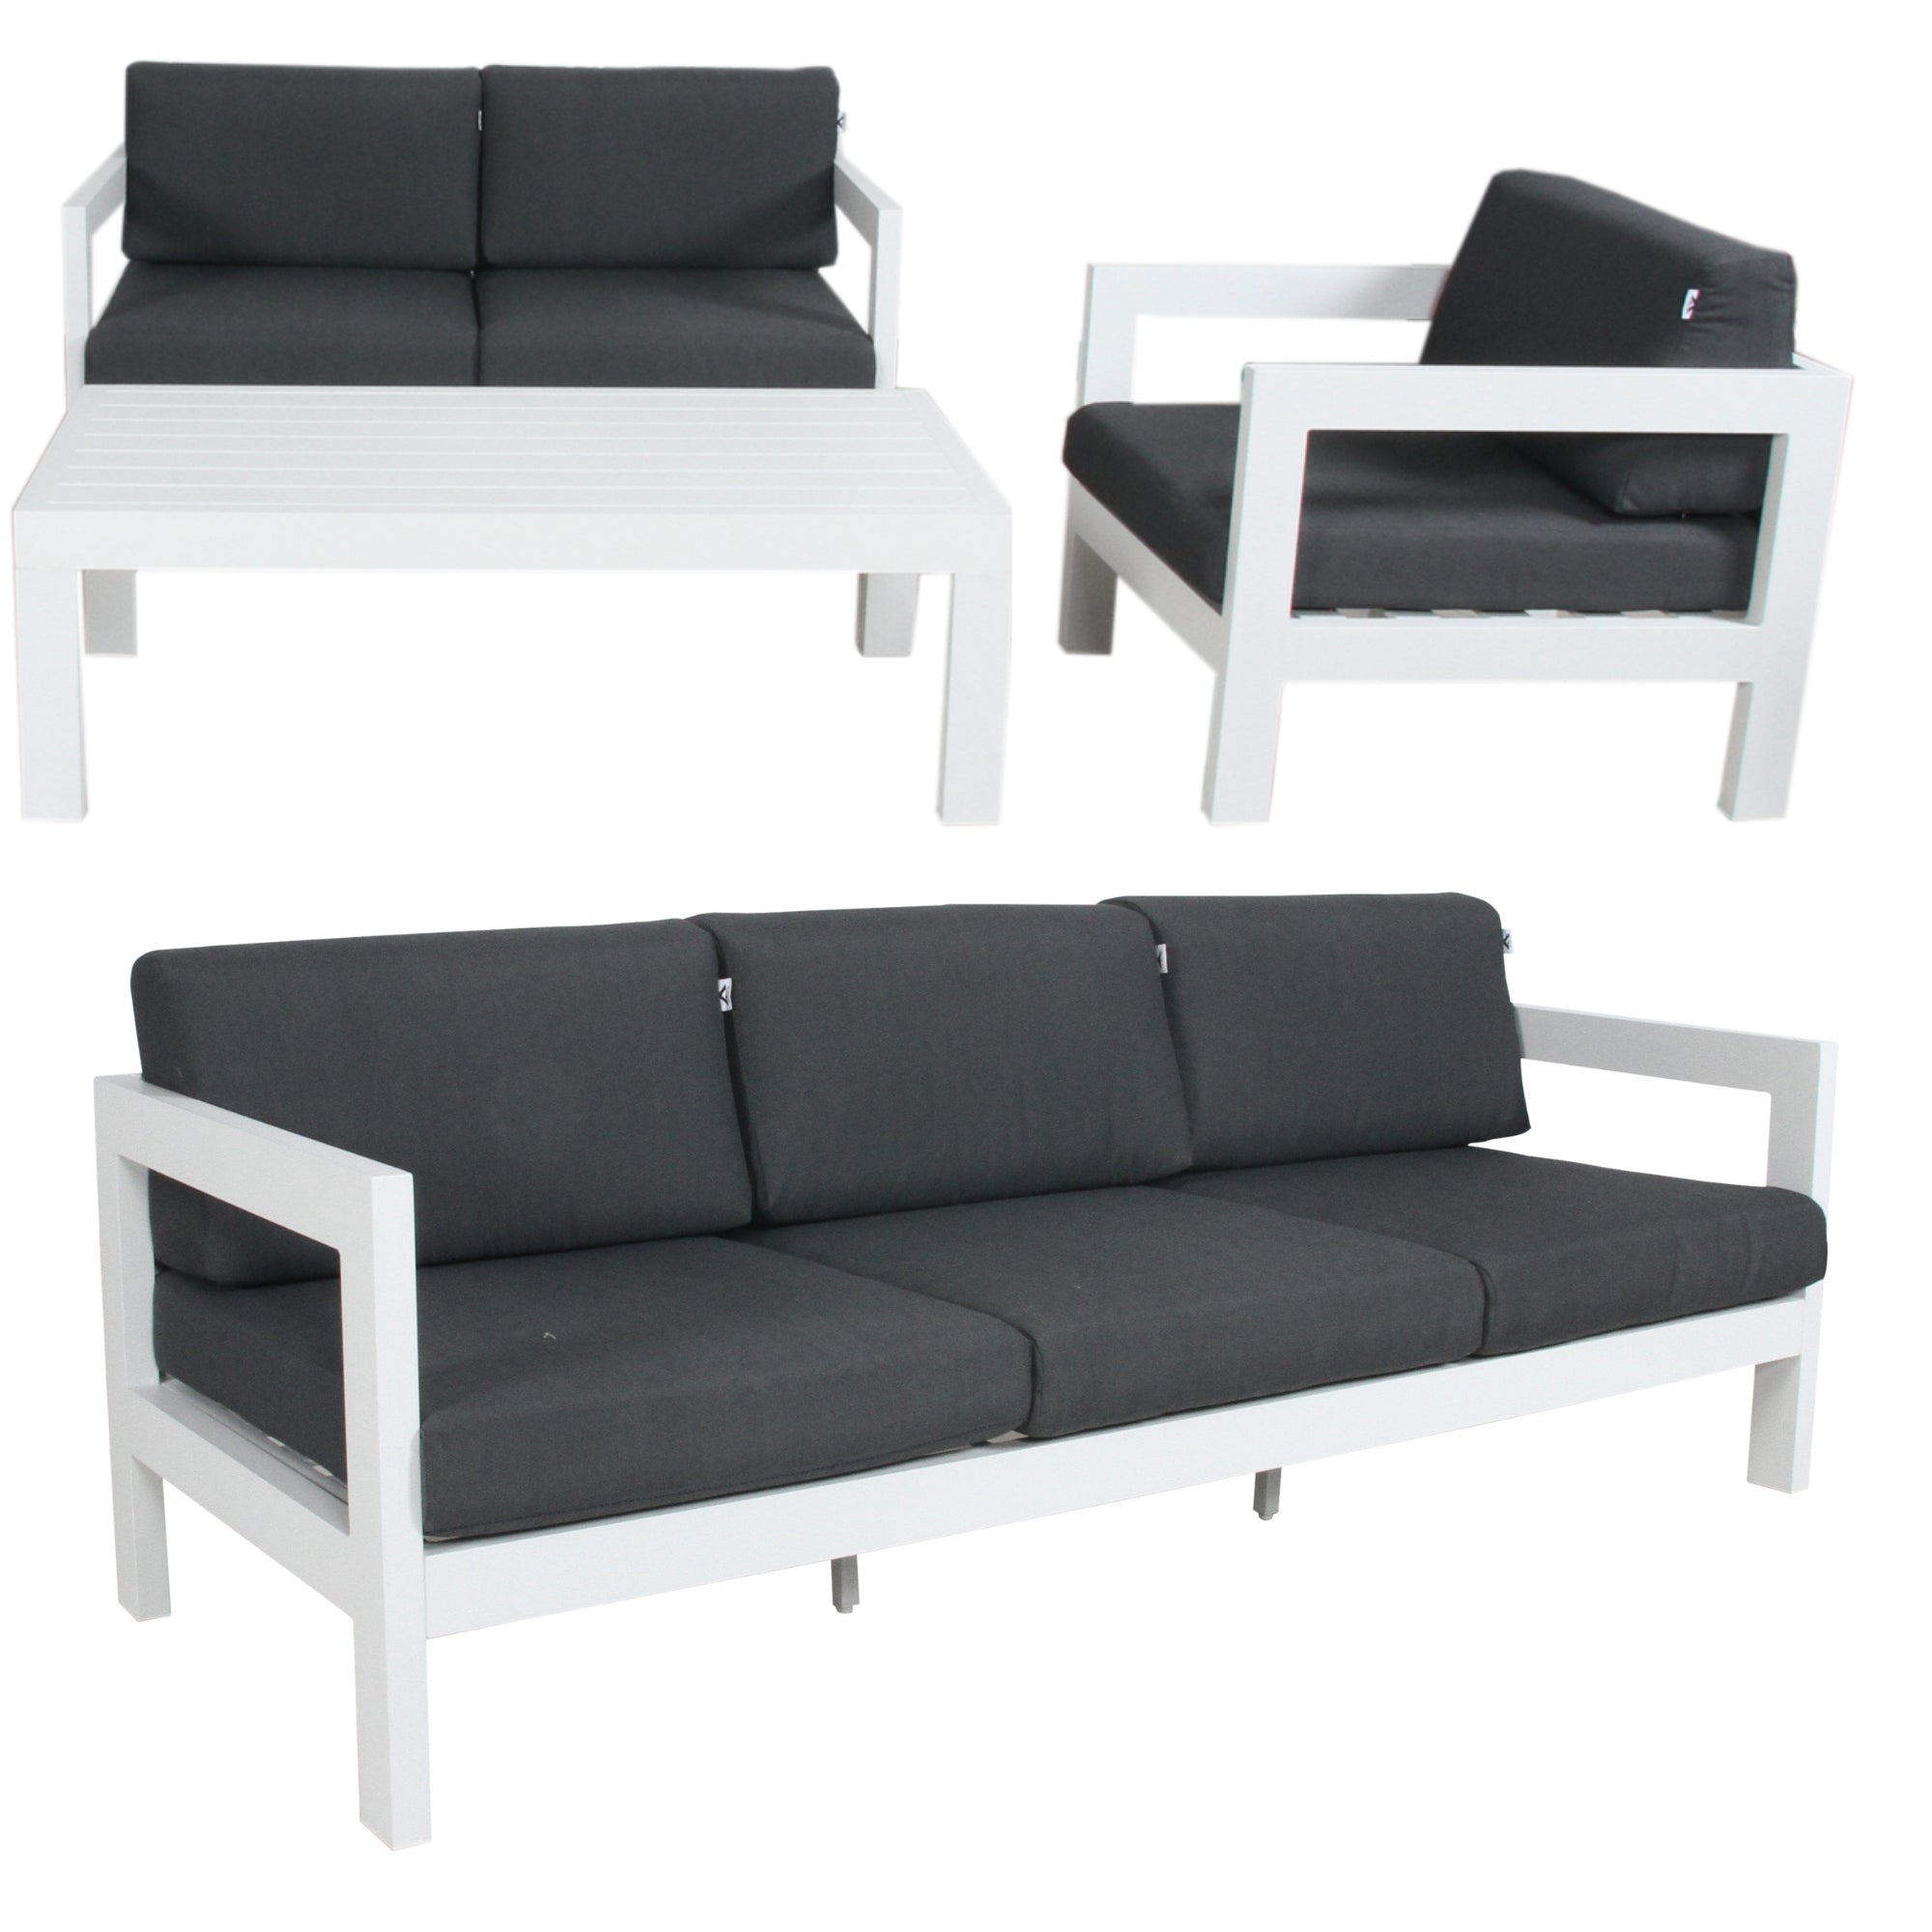 Weatherproof 4pc Outdoor Sofa Set with Coffee Table